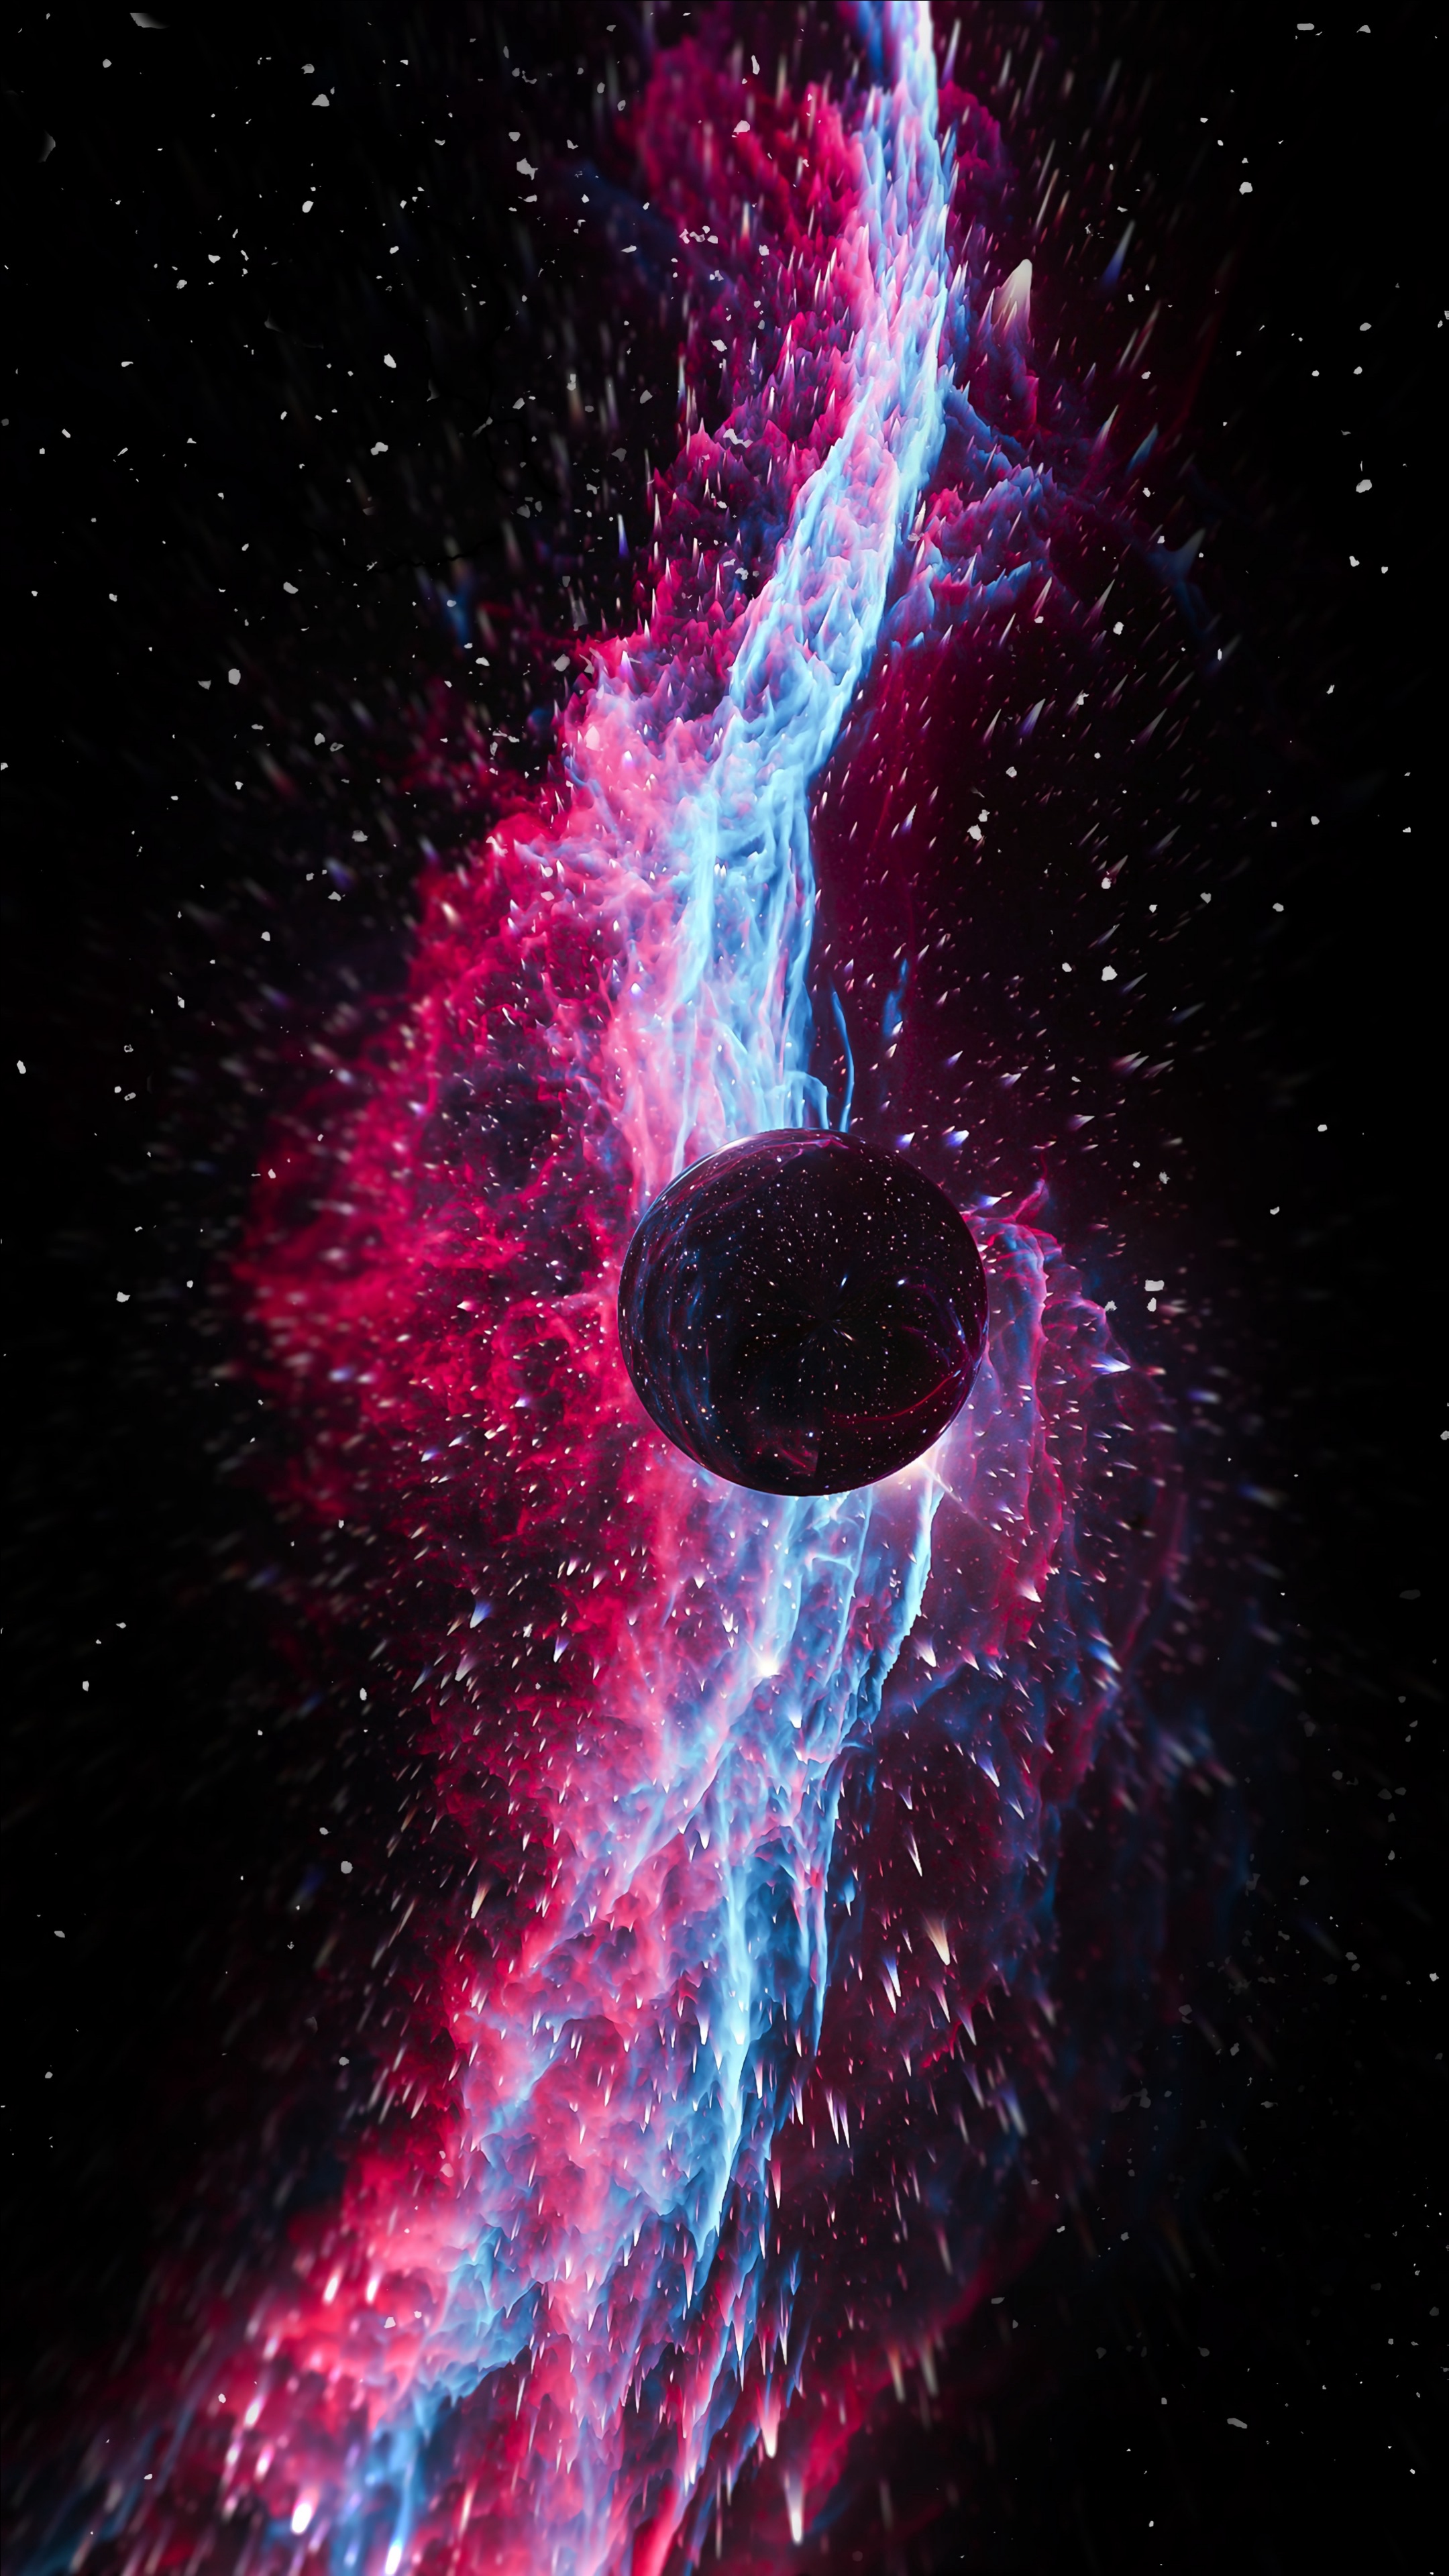 3d, ball, bright, flight, cosmic explosion, space explosion lock screen backgrounds